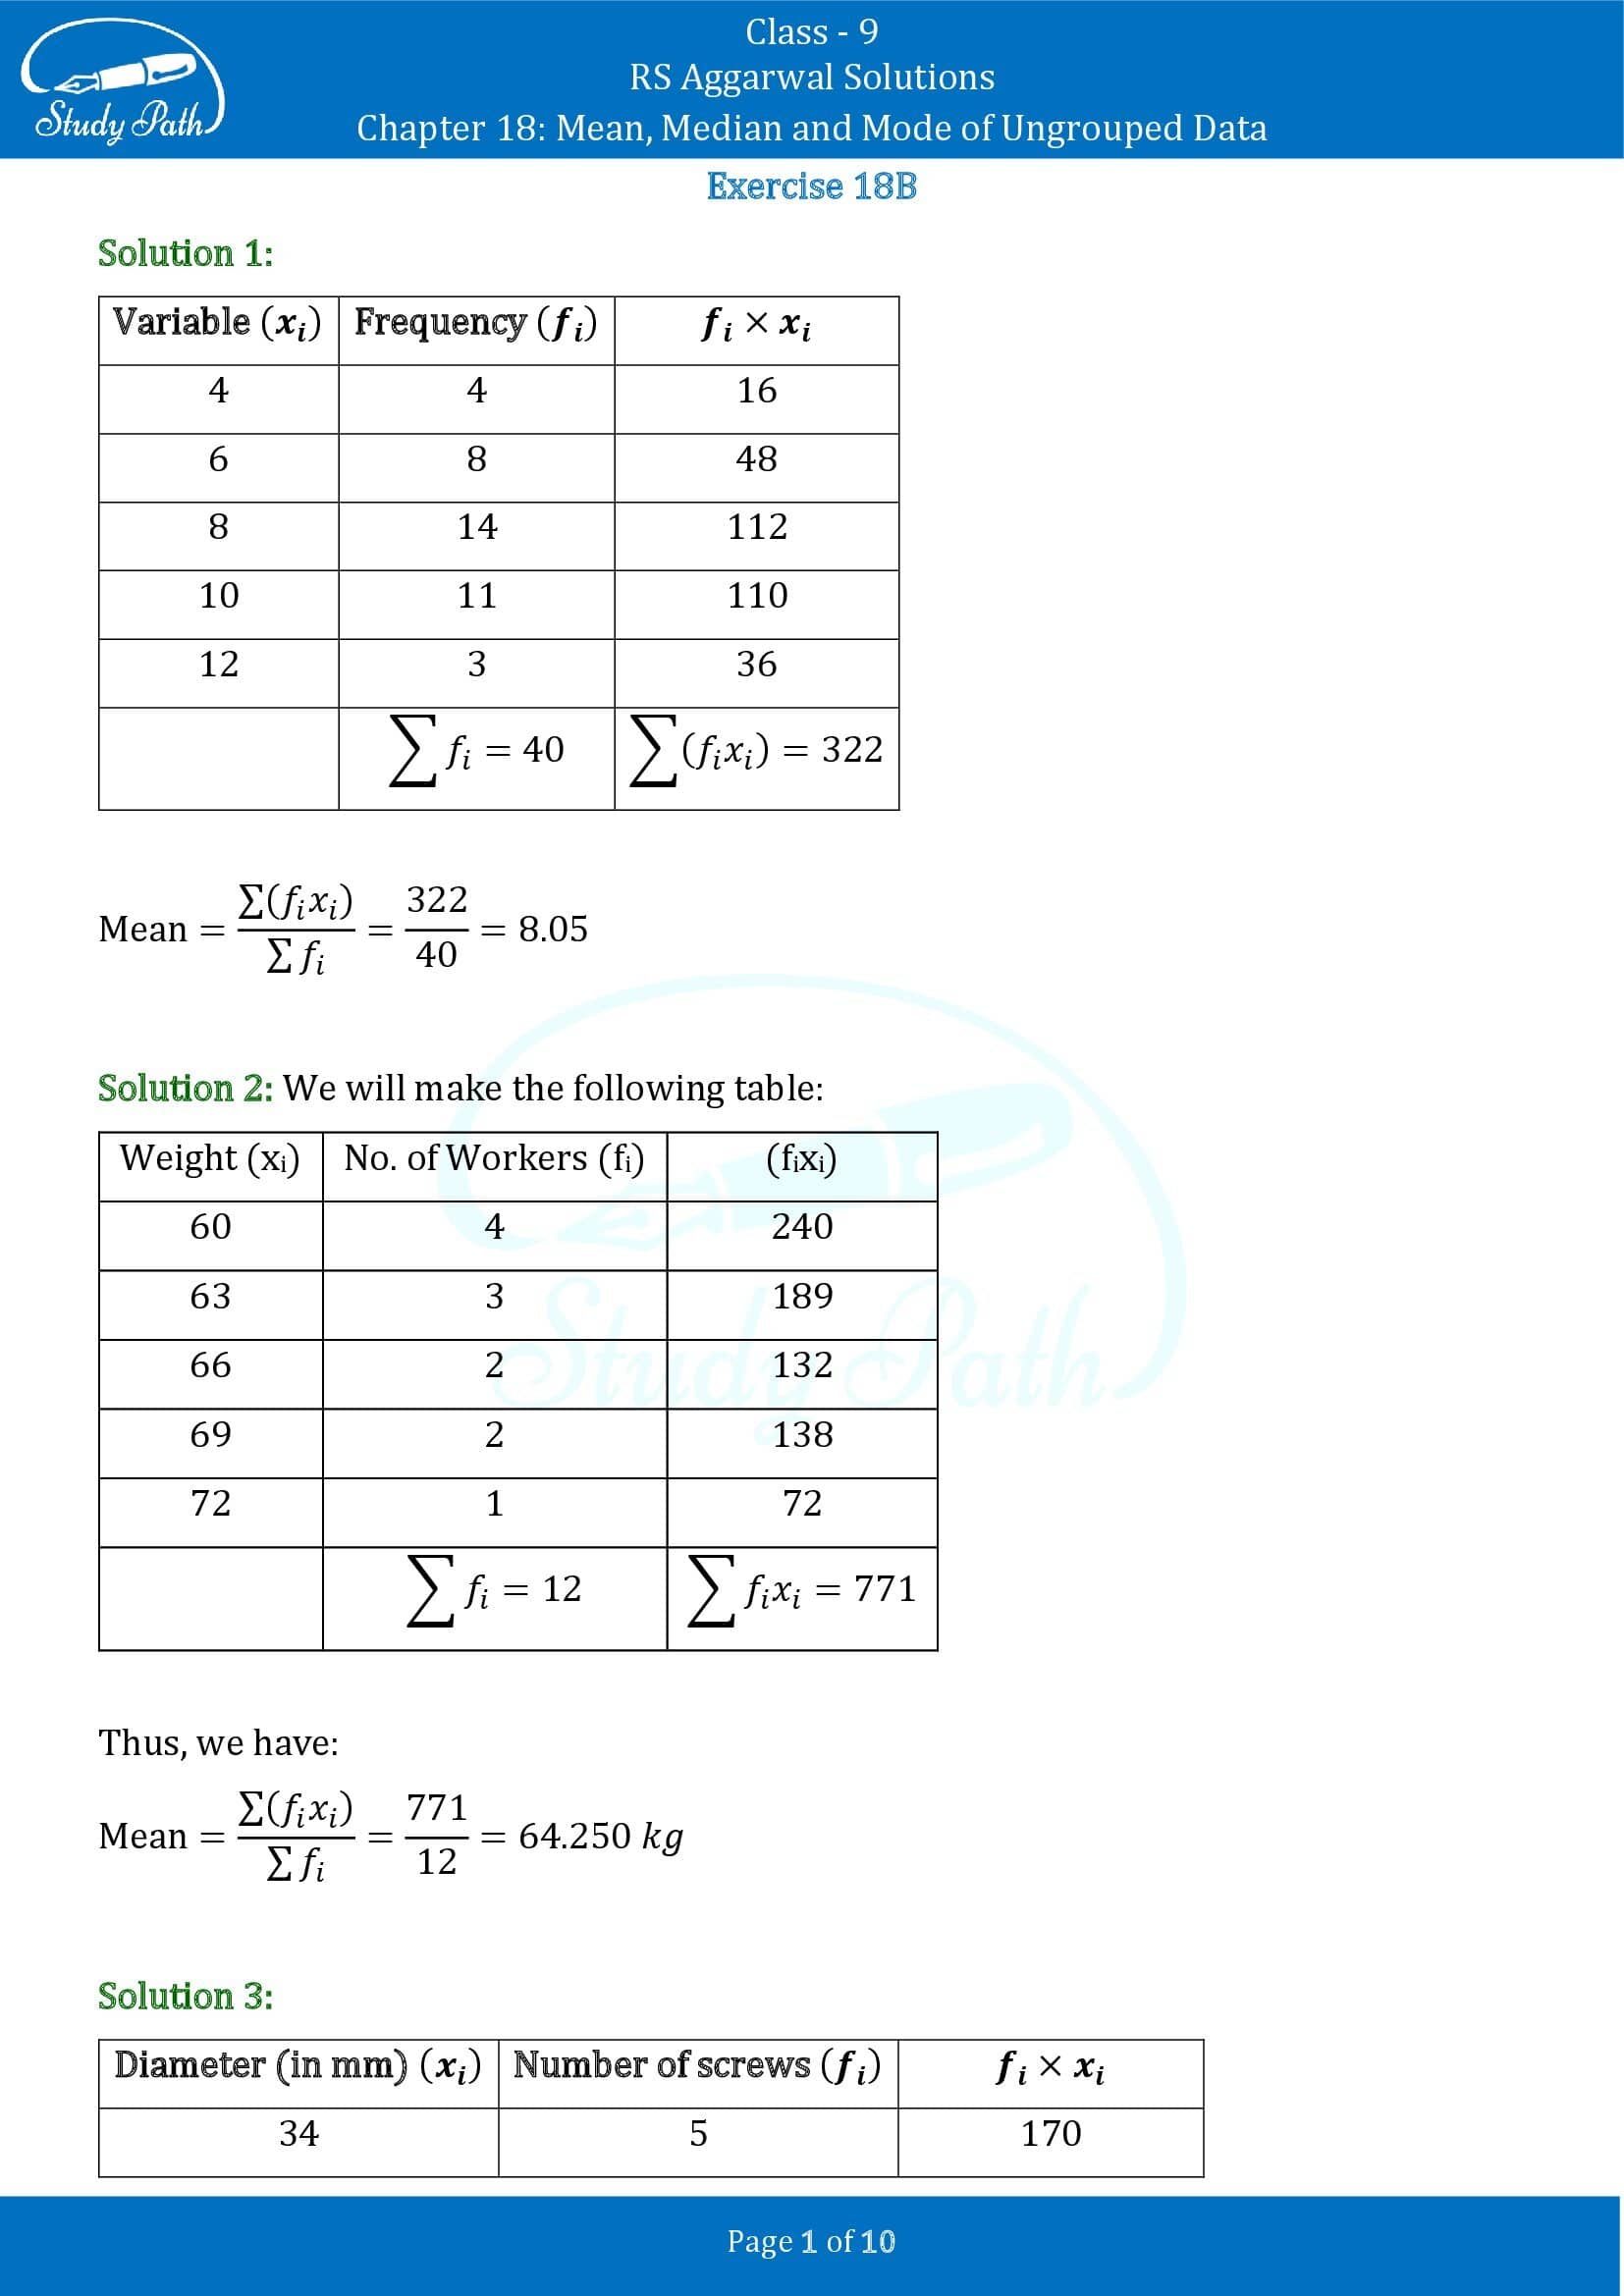 RS Aggarwal Solutions Class 9 Chapter 18 Mean Median and Mode of Ungrouped Data Exercise 18B 00001